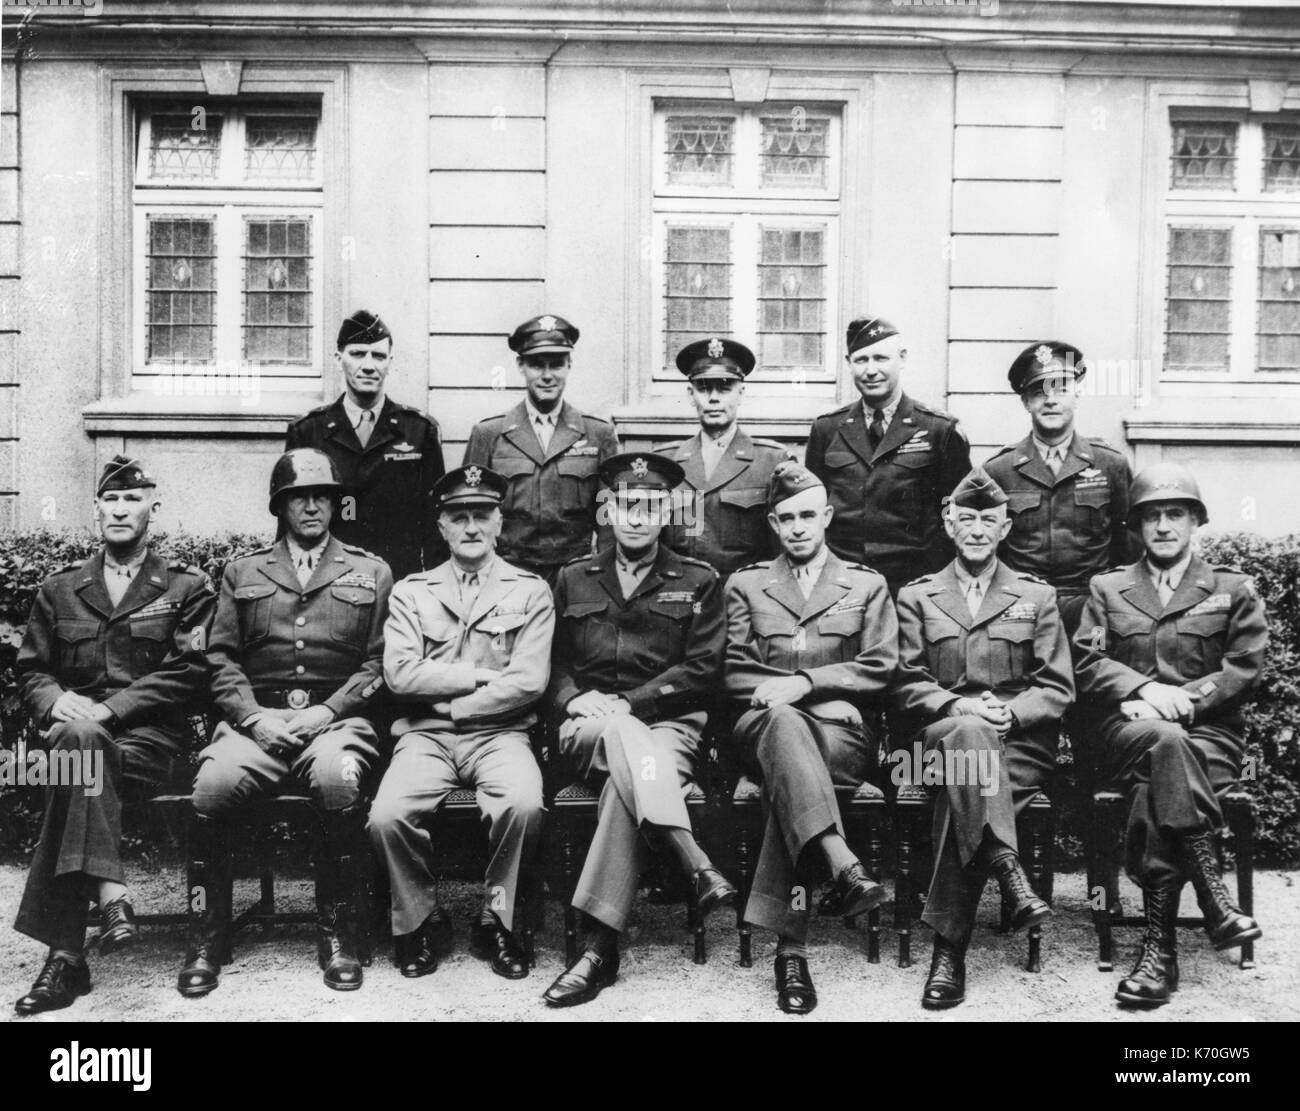 The brass that won the war. Seated l-r are Simpson, Patton, Spaatz, Eisenhower, Bradley, Hodges and Gerow. Standing are Stearley, Vandenburg, Smith, Vanderberg, Smith, Weyland and Nugent. 1945. Stock Photo